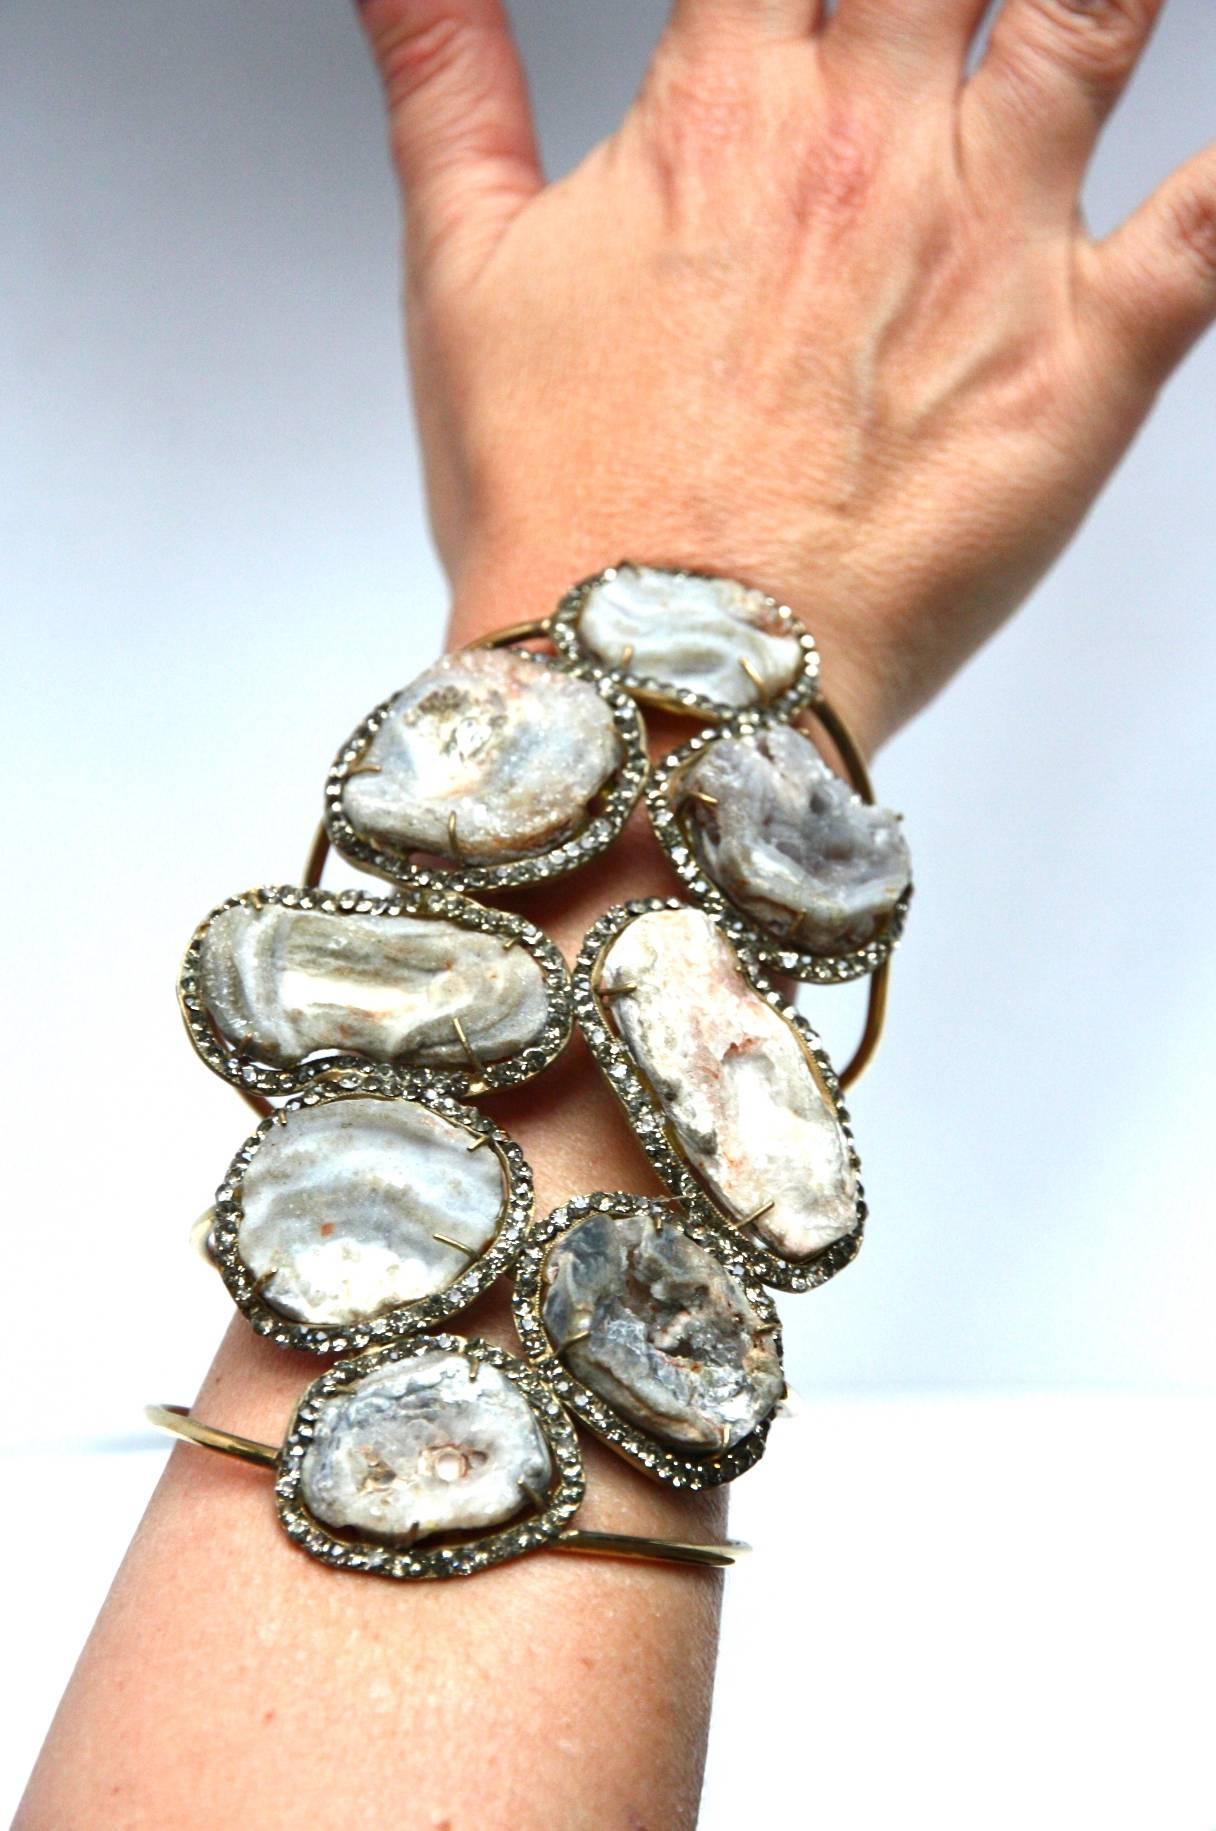 Incredible Bangle with druzy agata stone surrounded by fumè quartz bronze linked.
Very statuesque pieces for sure very unique one.
All Giulia Colussi jewelry is new and has never been previously owned or worn. Each item will arrive at your door